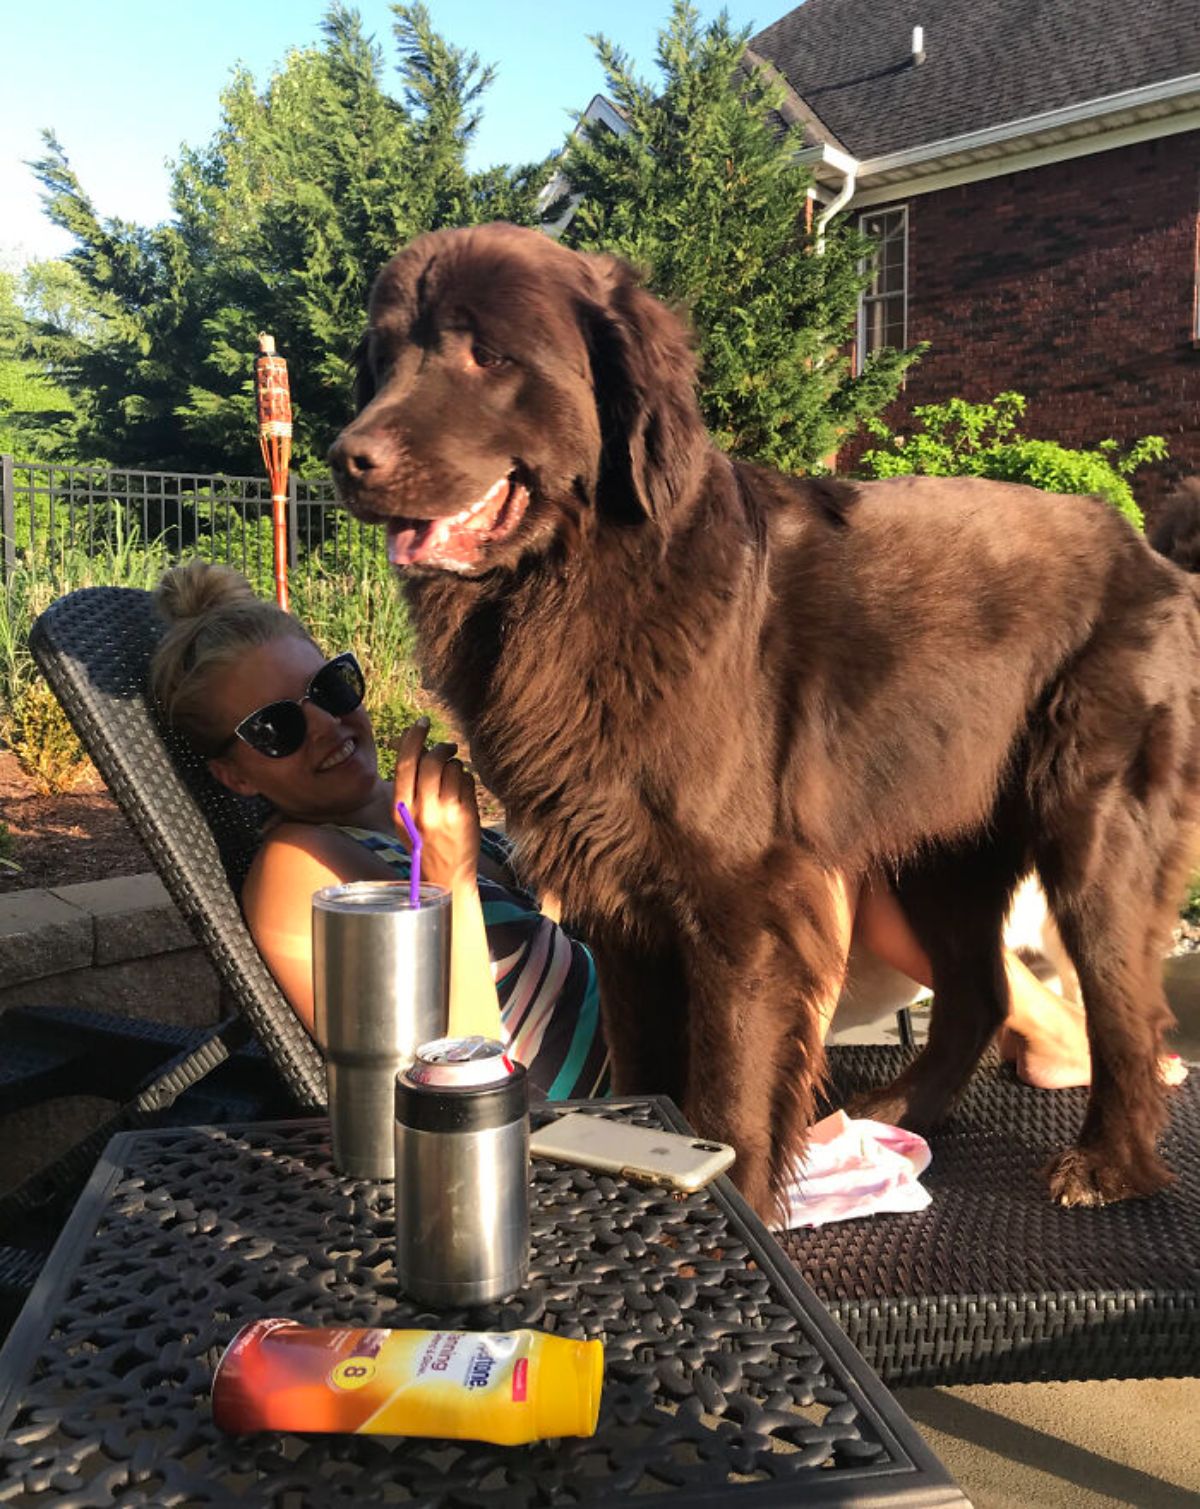 large fluffy brown dog standing over a woman on a recliner